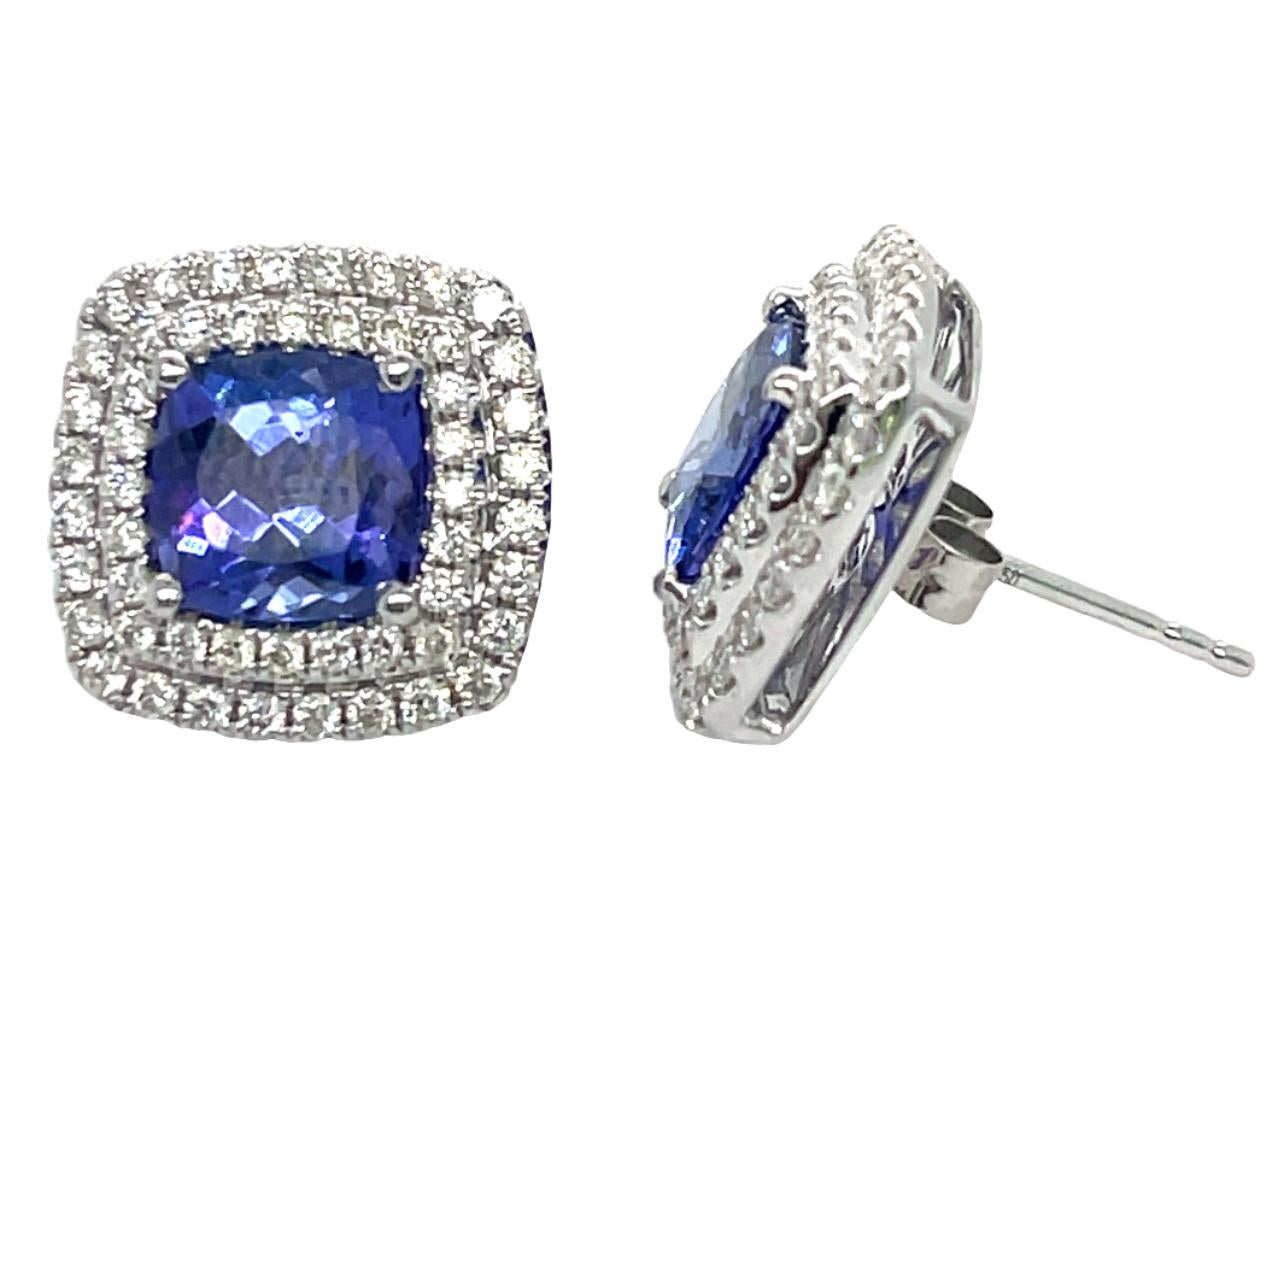 These stunning natural AAA Tanzanite stud earrings are surrounded by two halos of shimmering brilliant cut diamonds. There is a double push lock for extra security. These earrings have detailed tags attached and come in a beautiful box ready for the